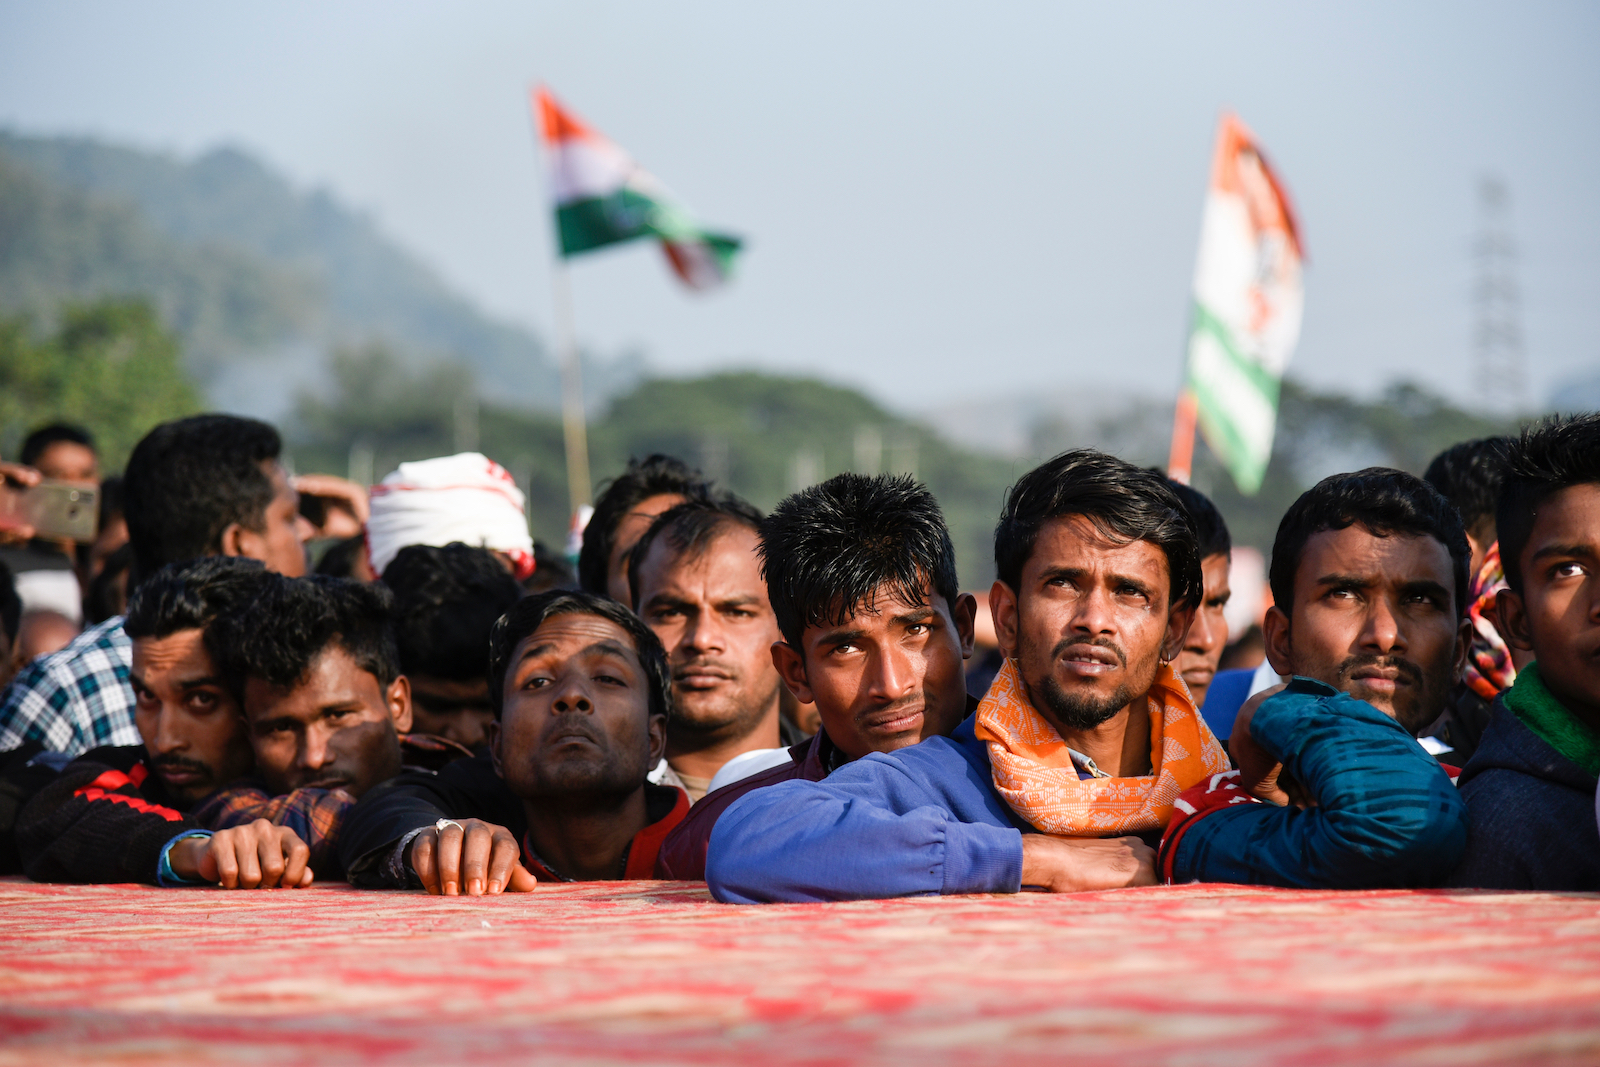 Congress party supporters protesting the Citizenship (Amendment) Act in 2019 in Guwahati, India